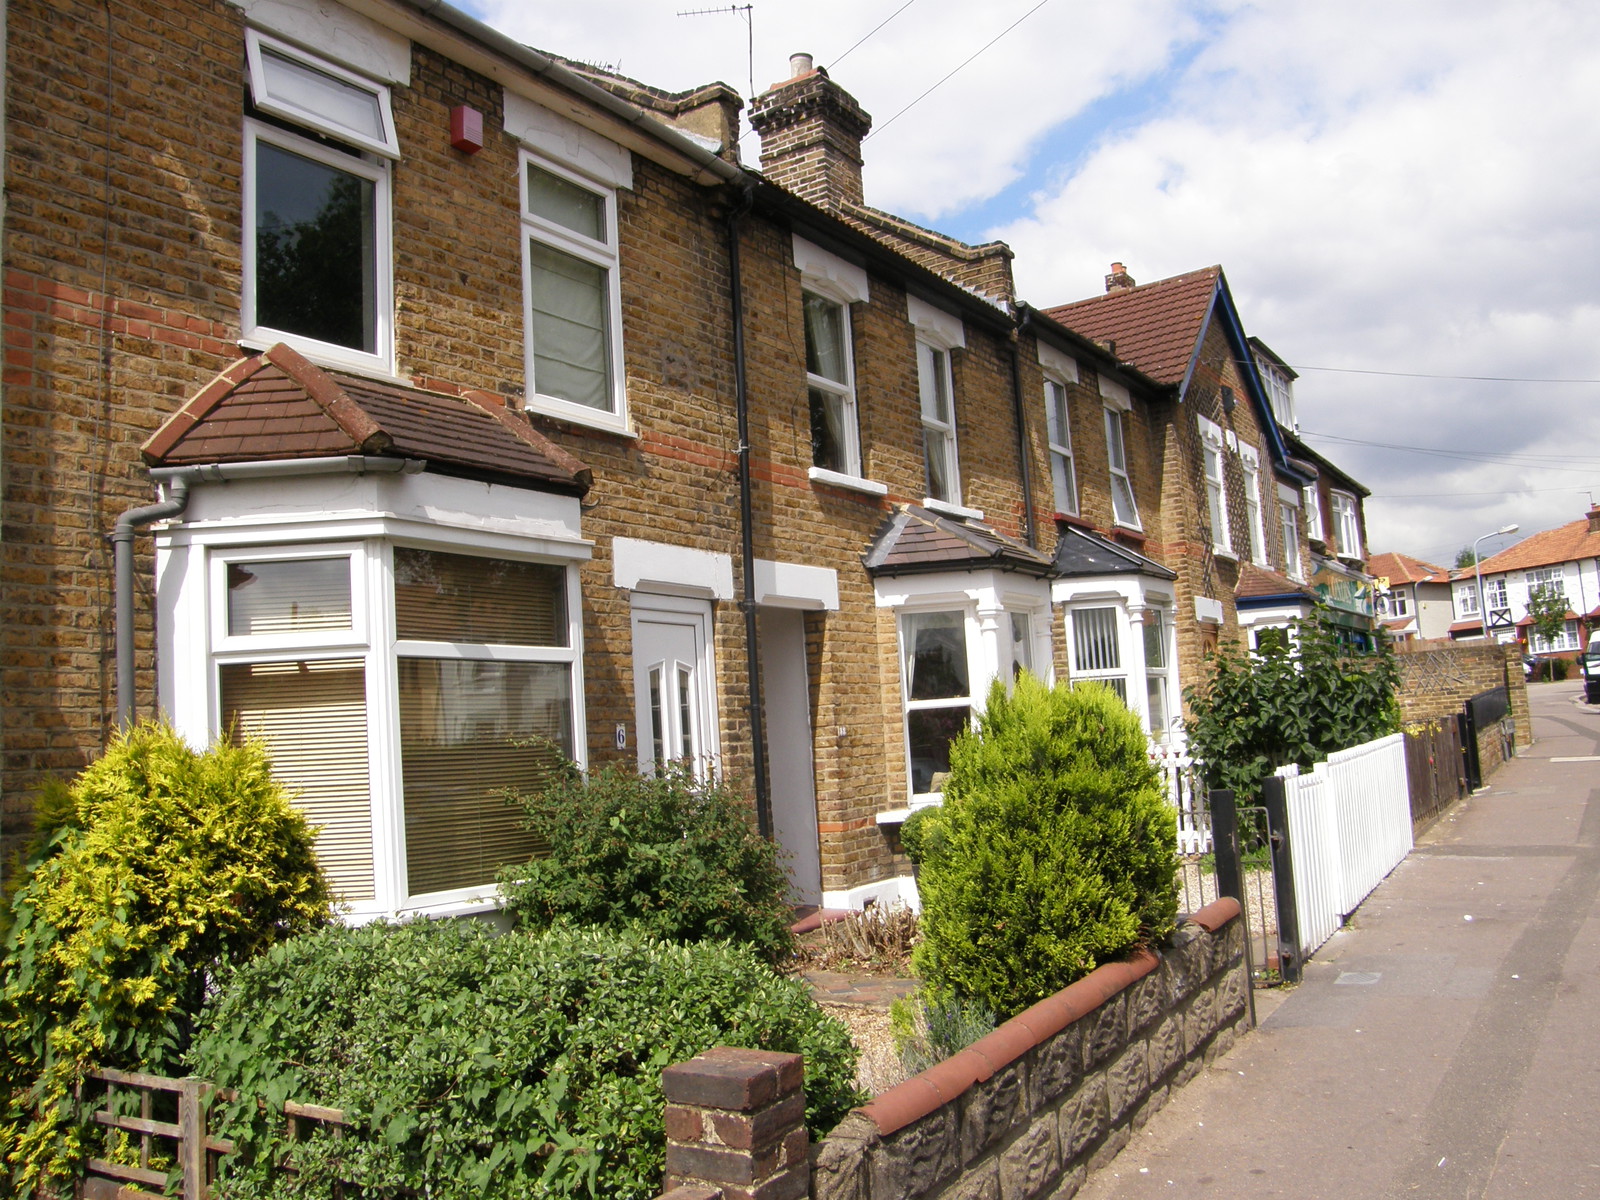 Terraces on Shenfield Road